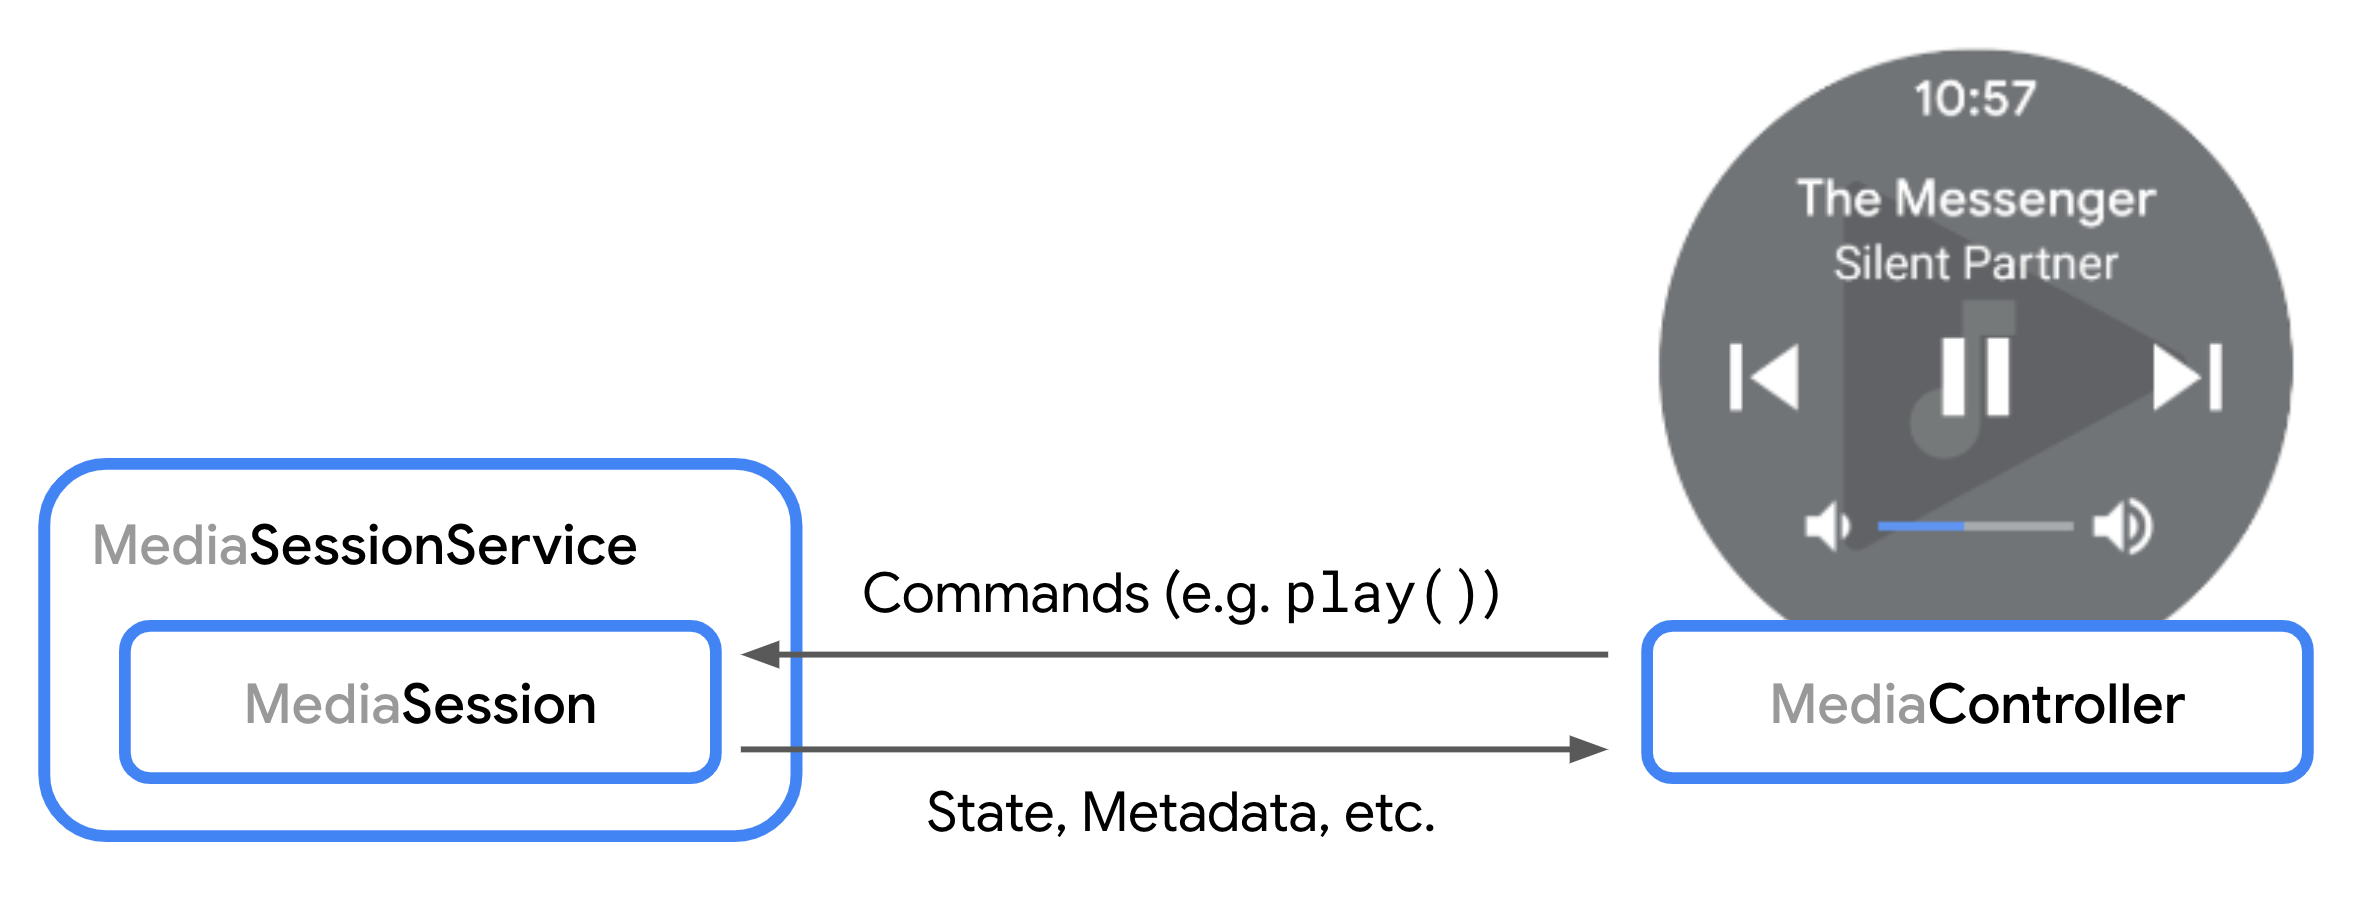 A diagram demonstrating the interaction between a MediaSession and MediaController.